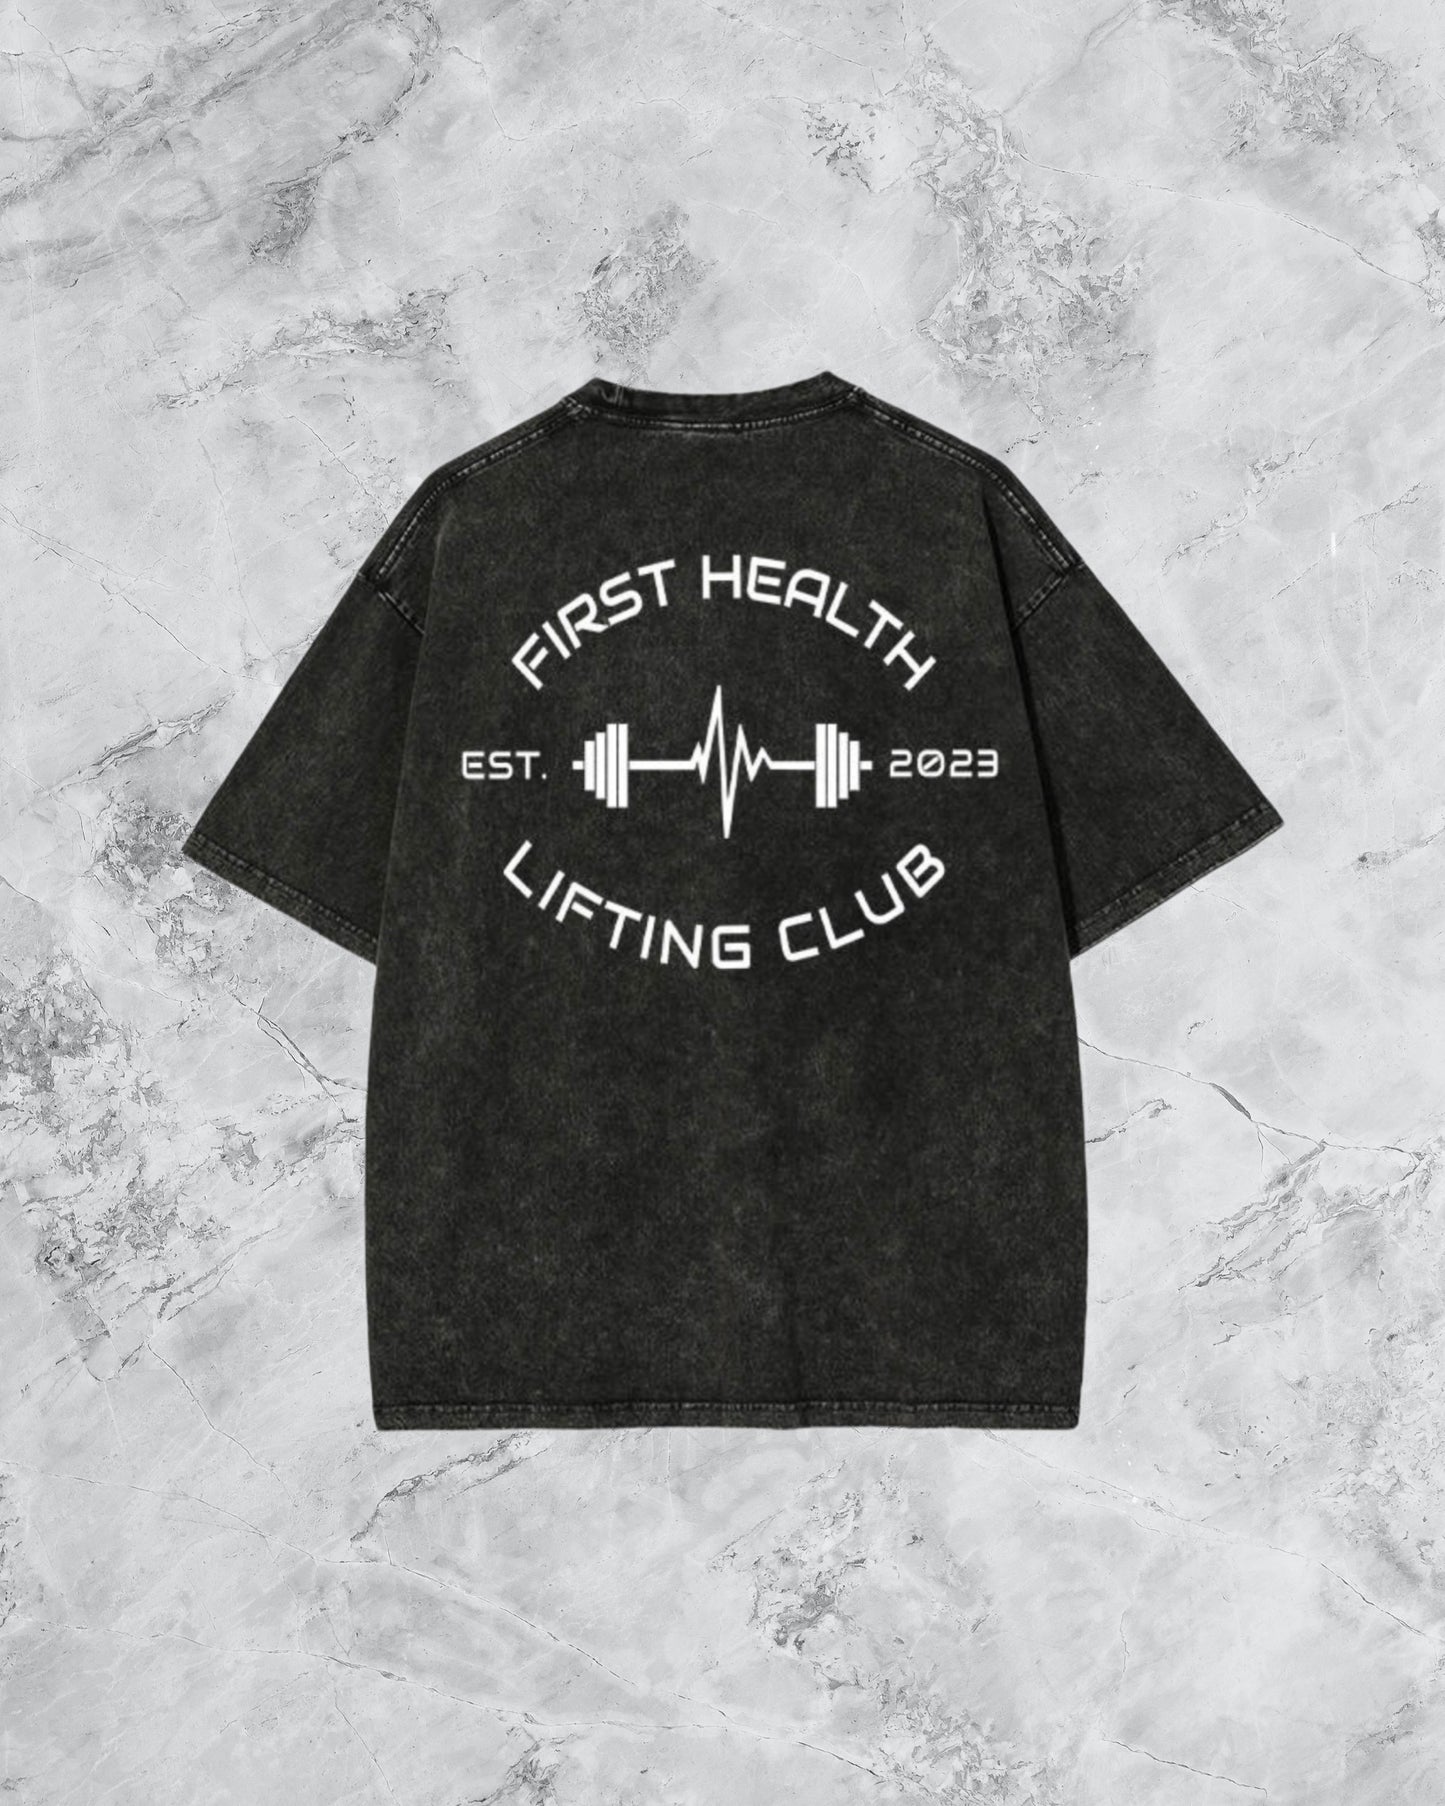 OVERSIZE GRAPHIC TEE - Vintage Lifting Club